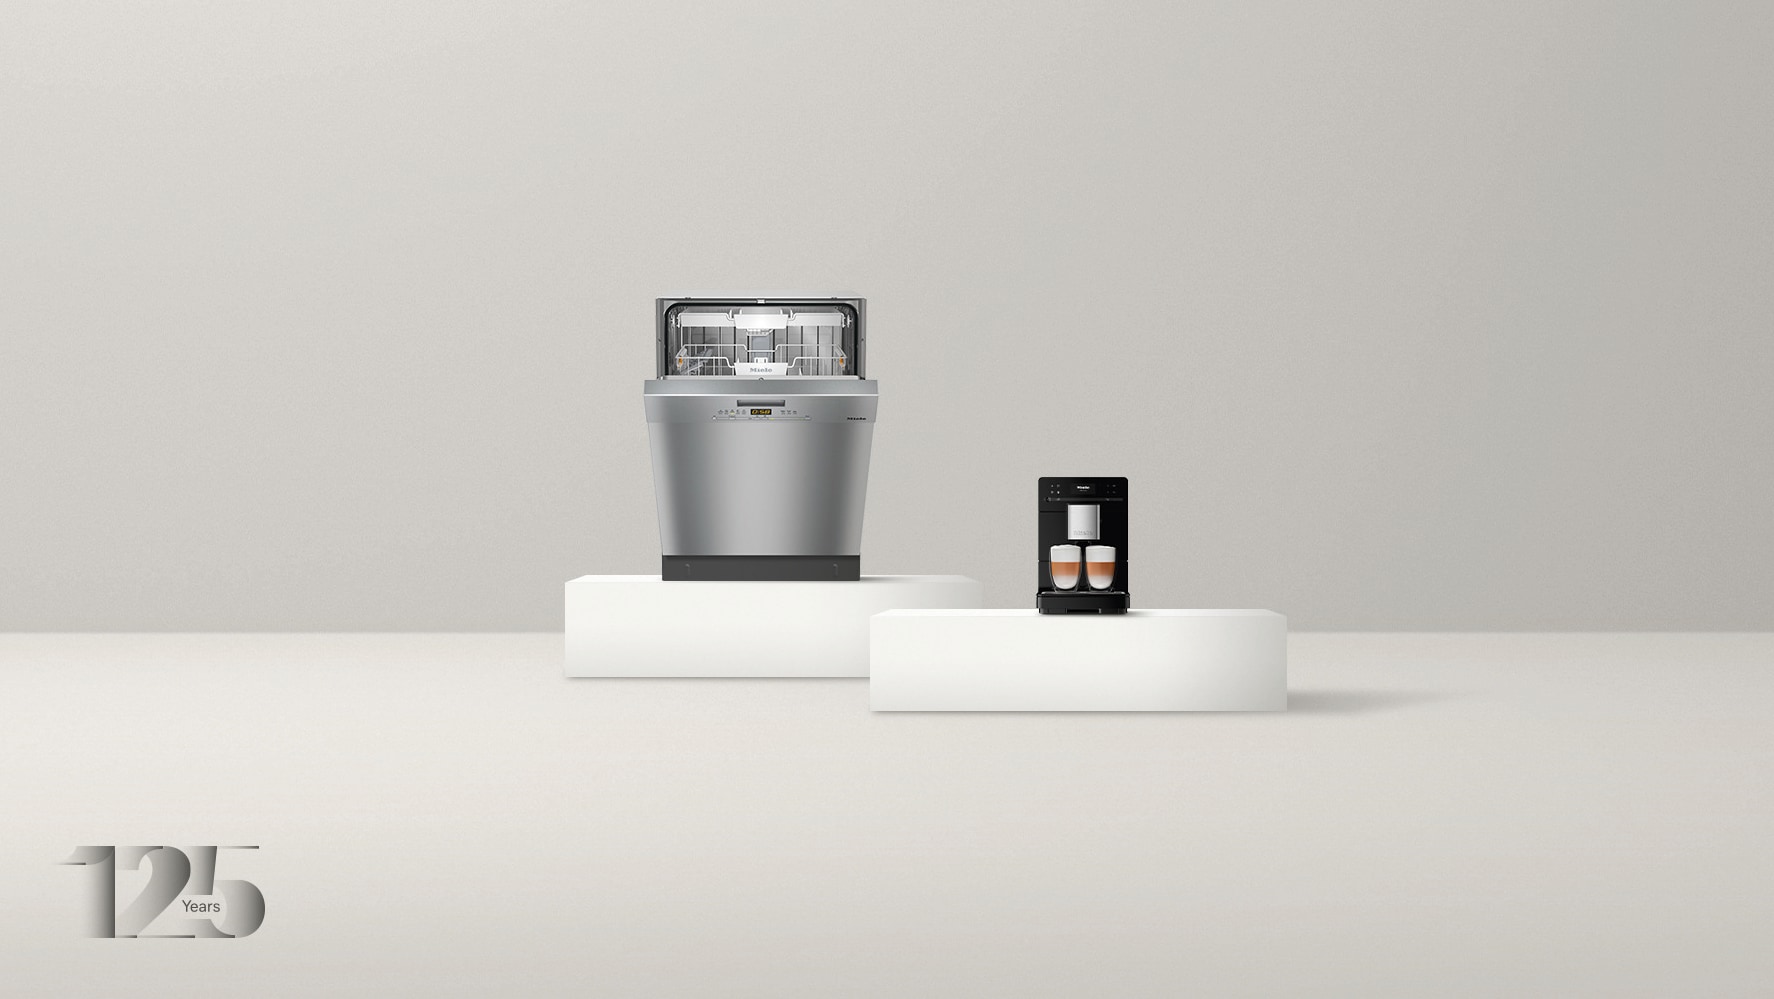 Dishwasher and countertop coffee machine on pedestals with a grey background